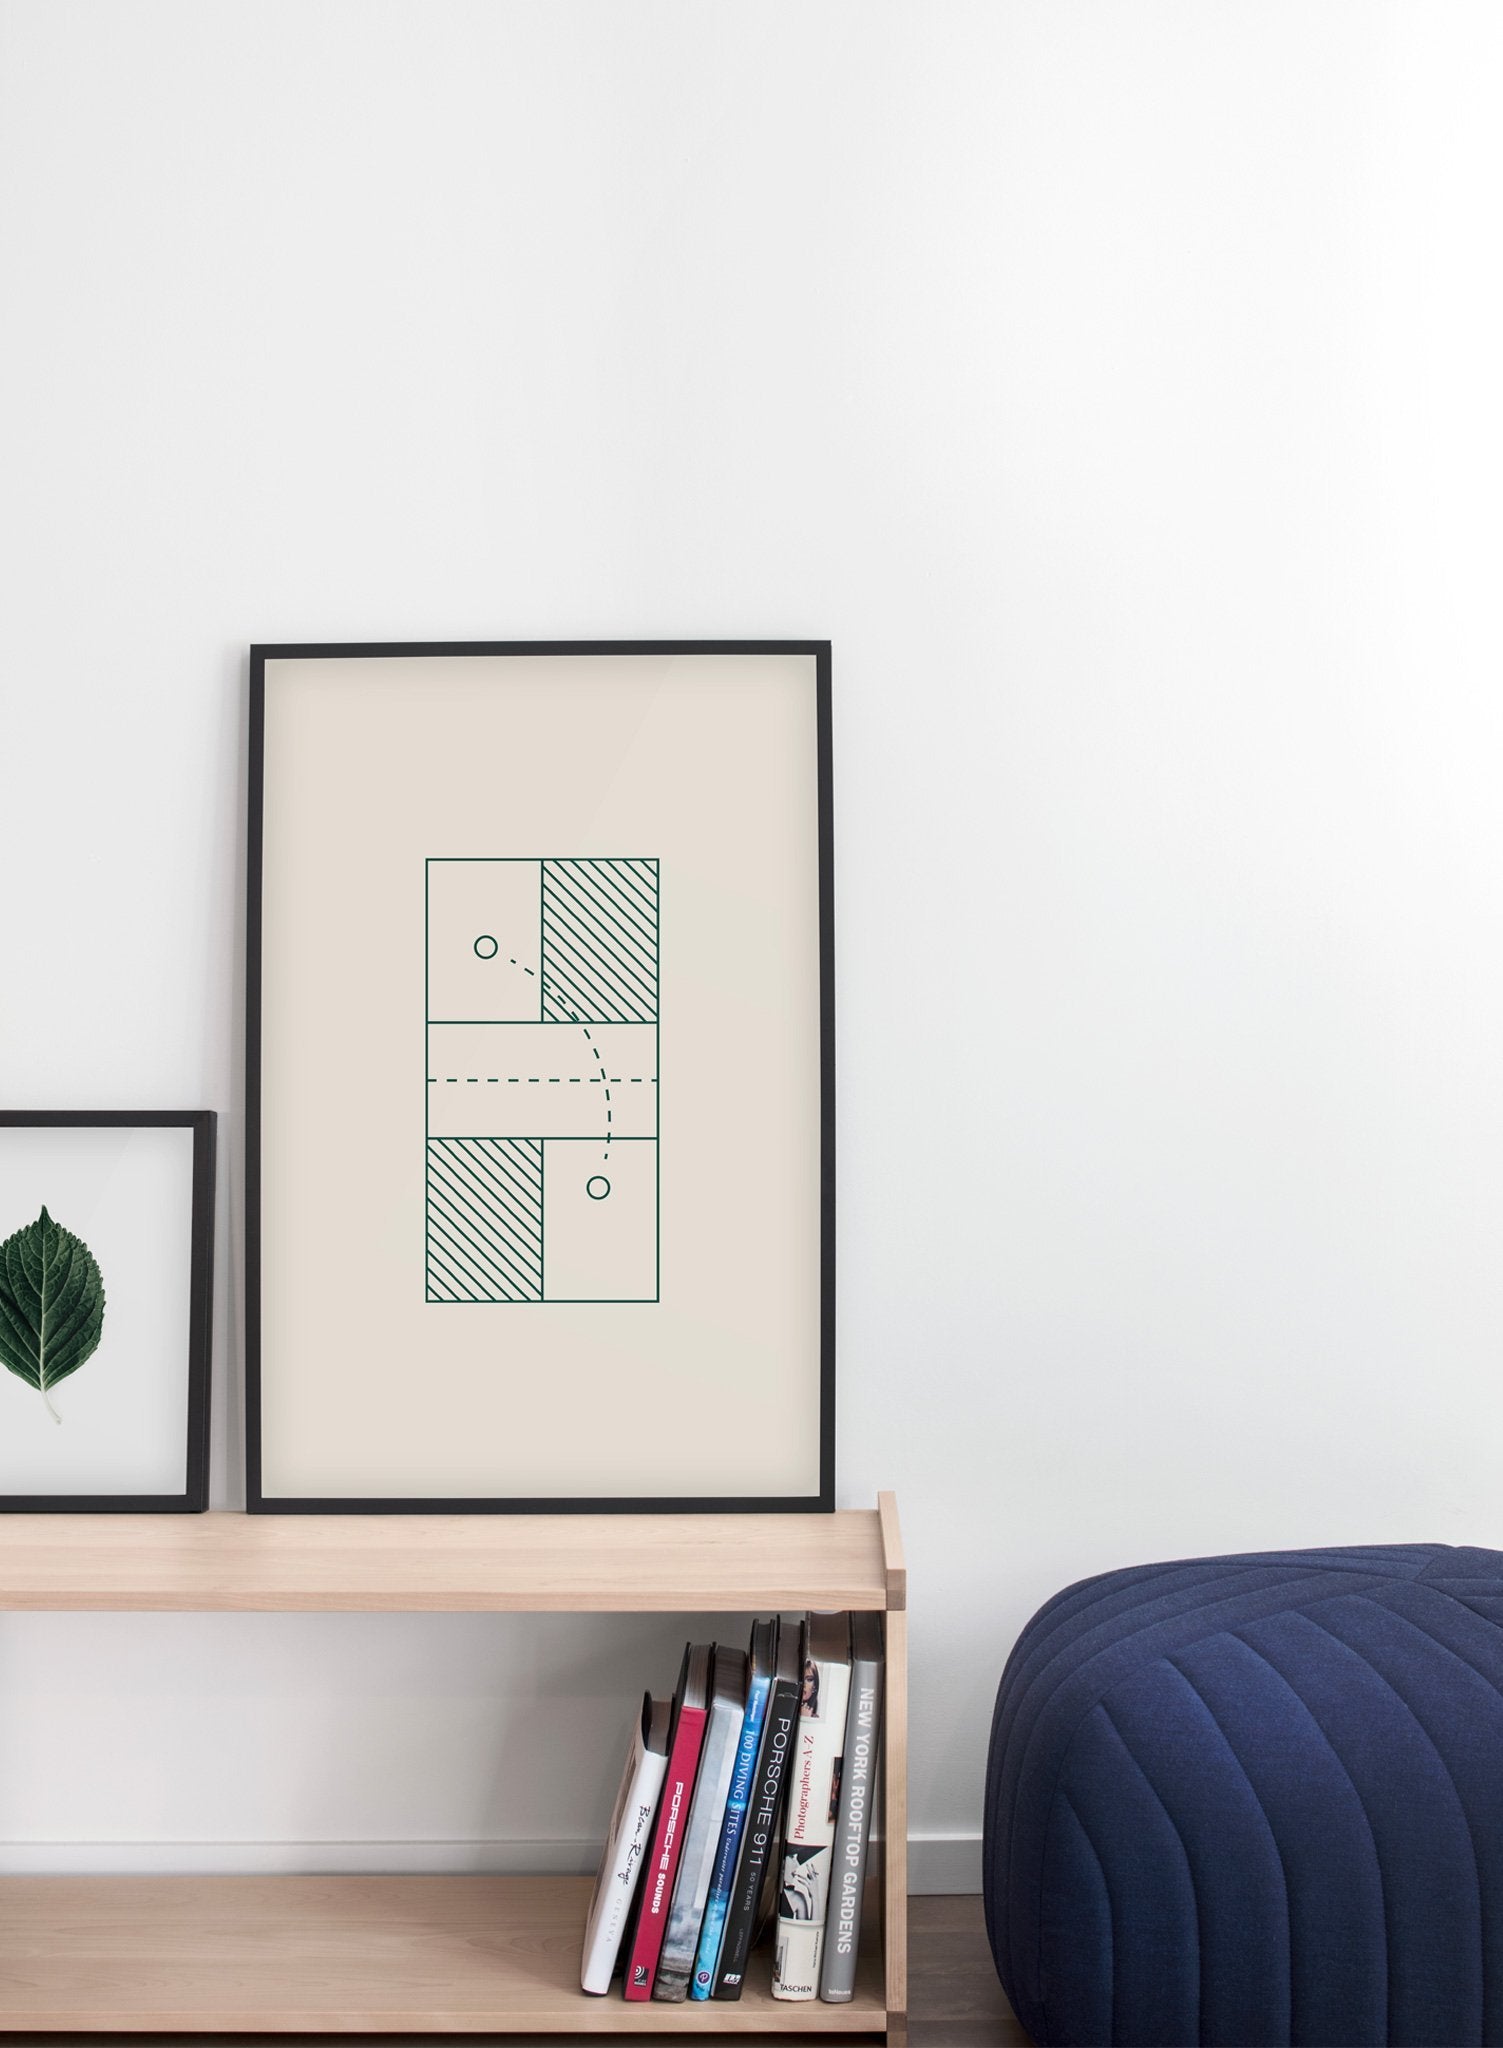 Badminton Days modern minimalist abstract design poster by Opposite Wall - Entryway